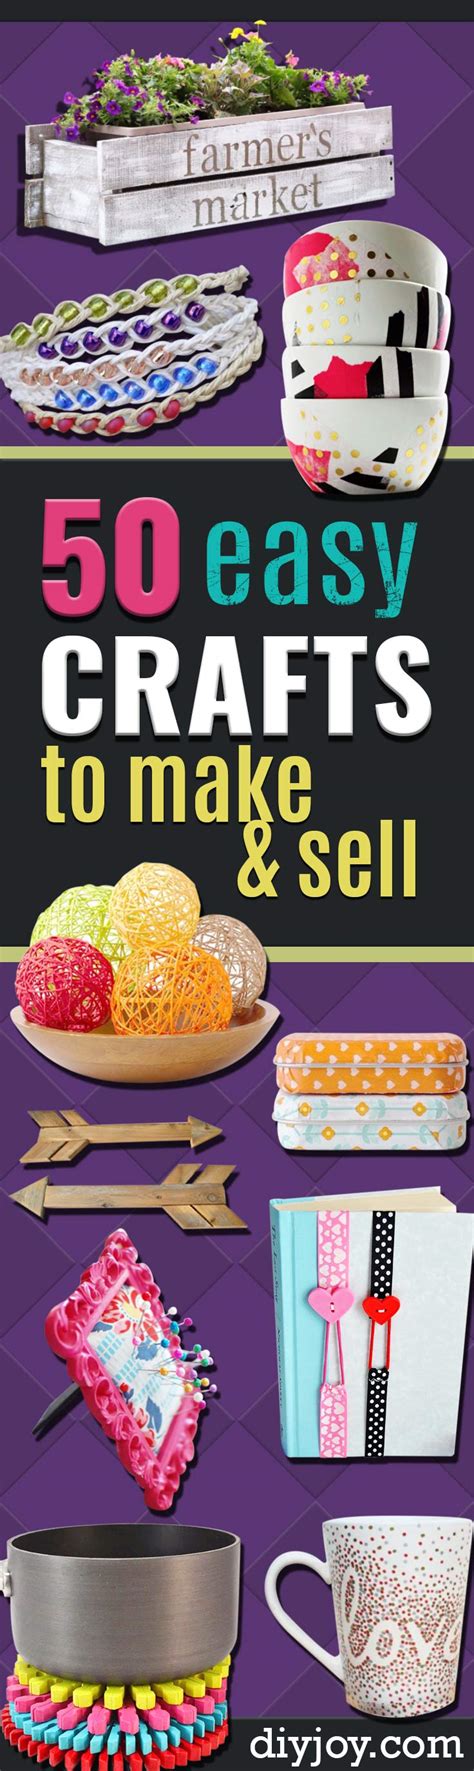 The Best Ideas For Craft Ideas For Adults To Make And Sell Home